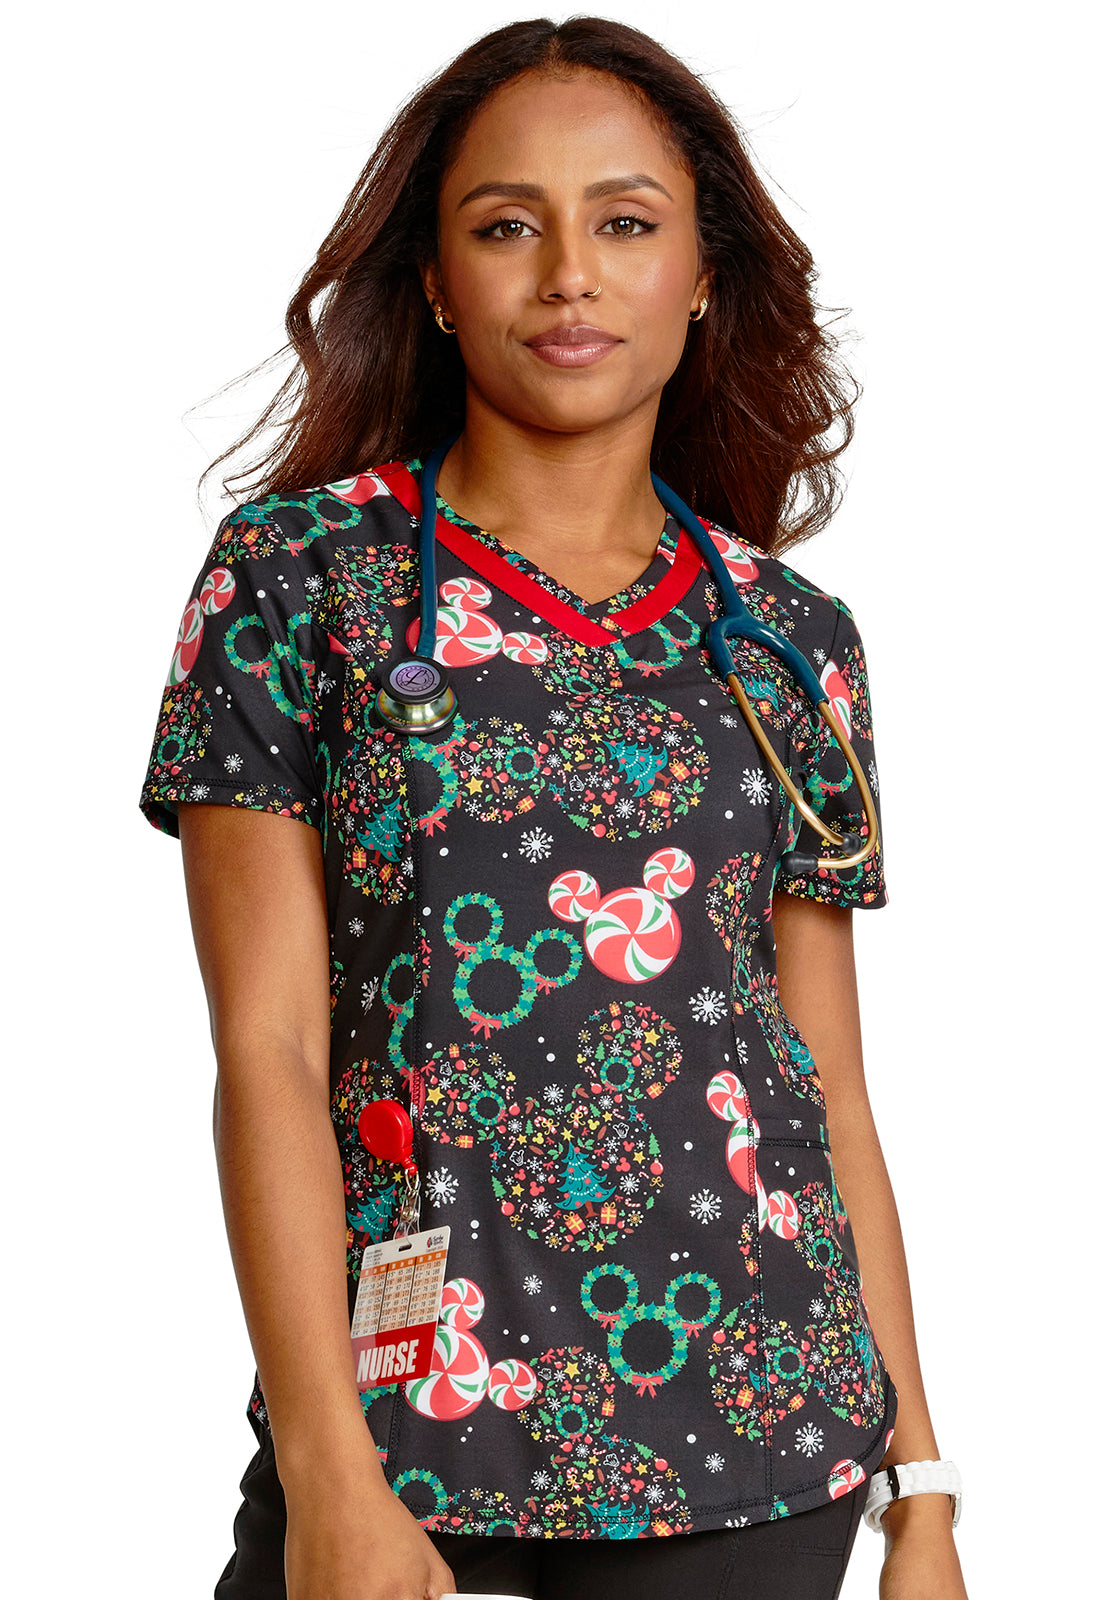 Women's Shaped V-Neck Print Top in Holiday Heads